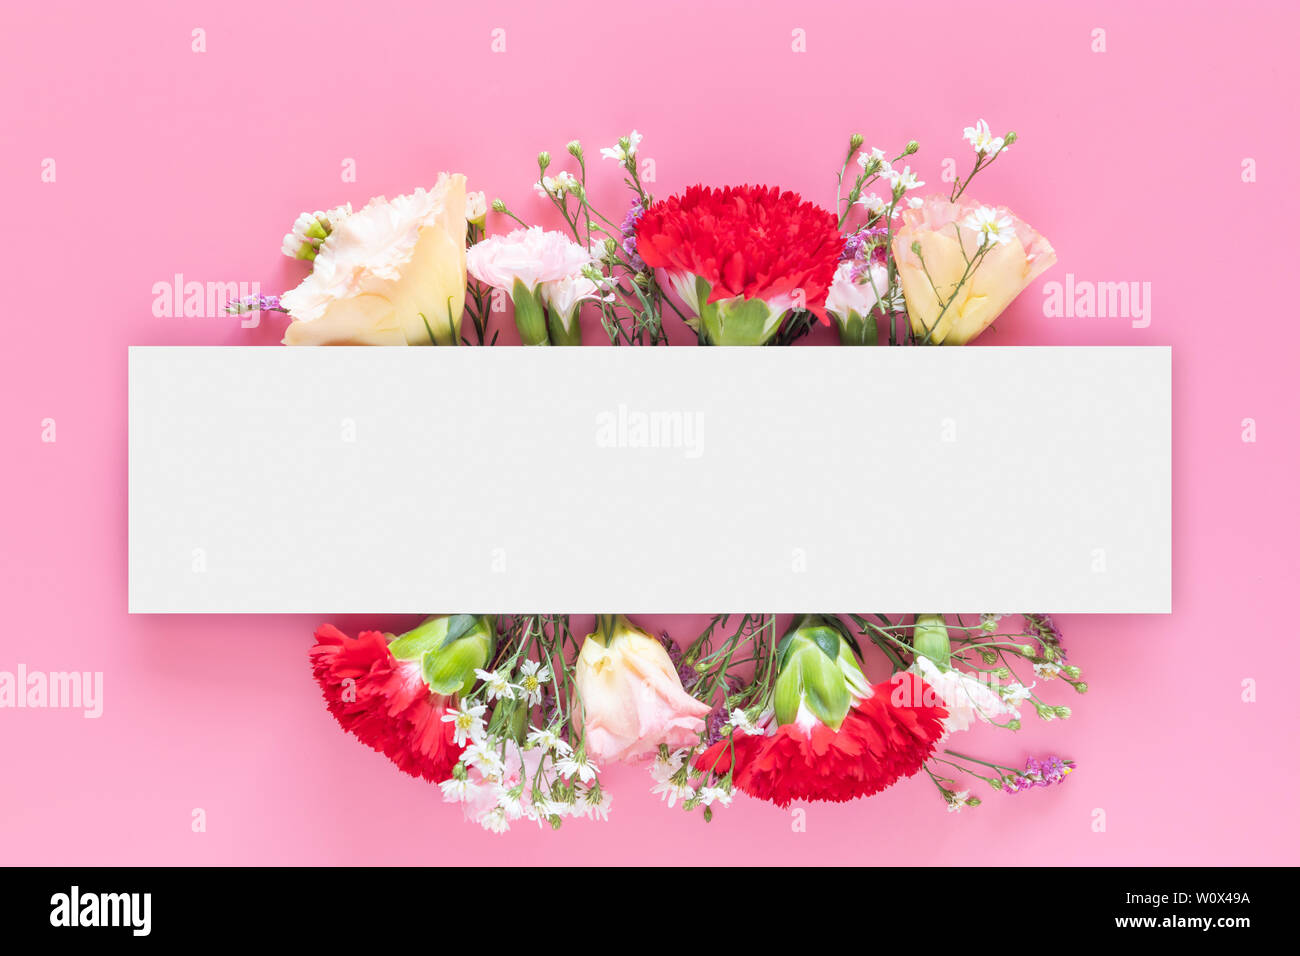 creative layout made with fresh colorful spring flowers on bright pink background with white rectangle bar banner label. wedding invitation, posters o Stock Photo